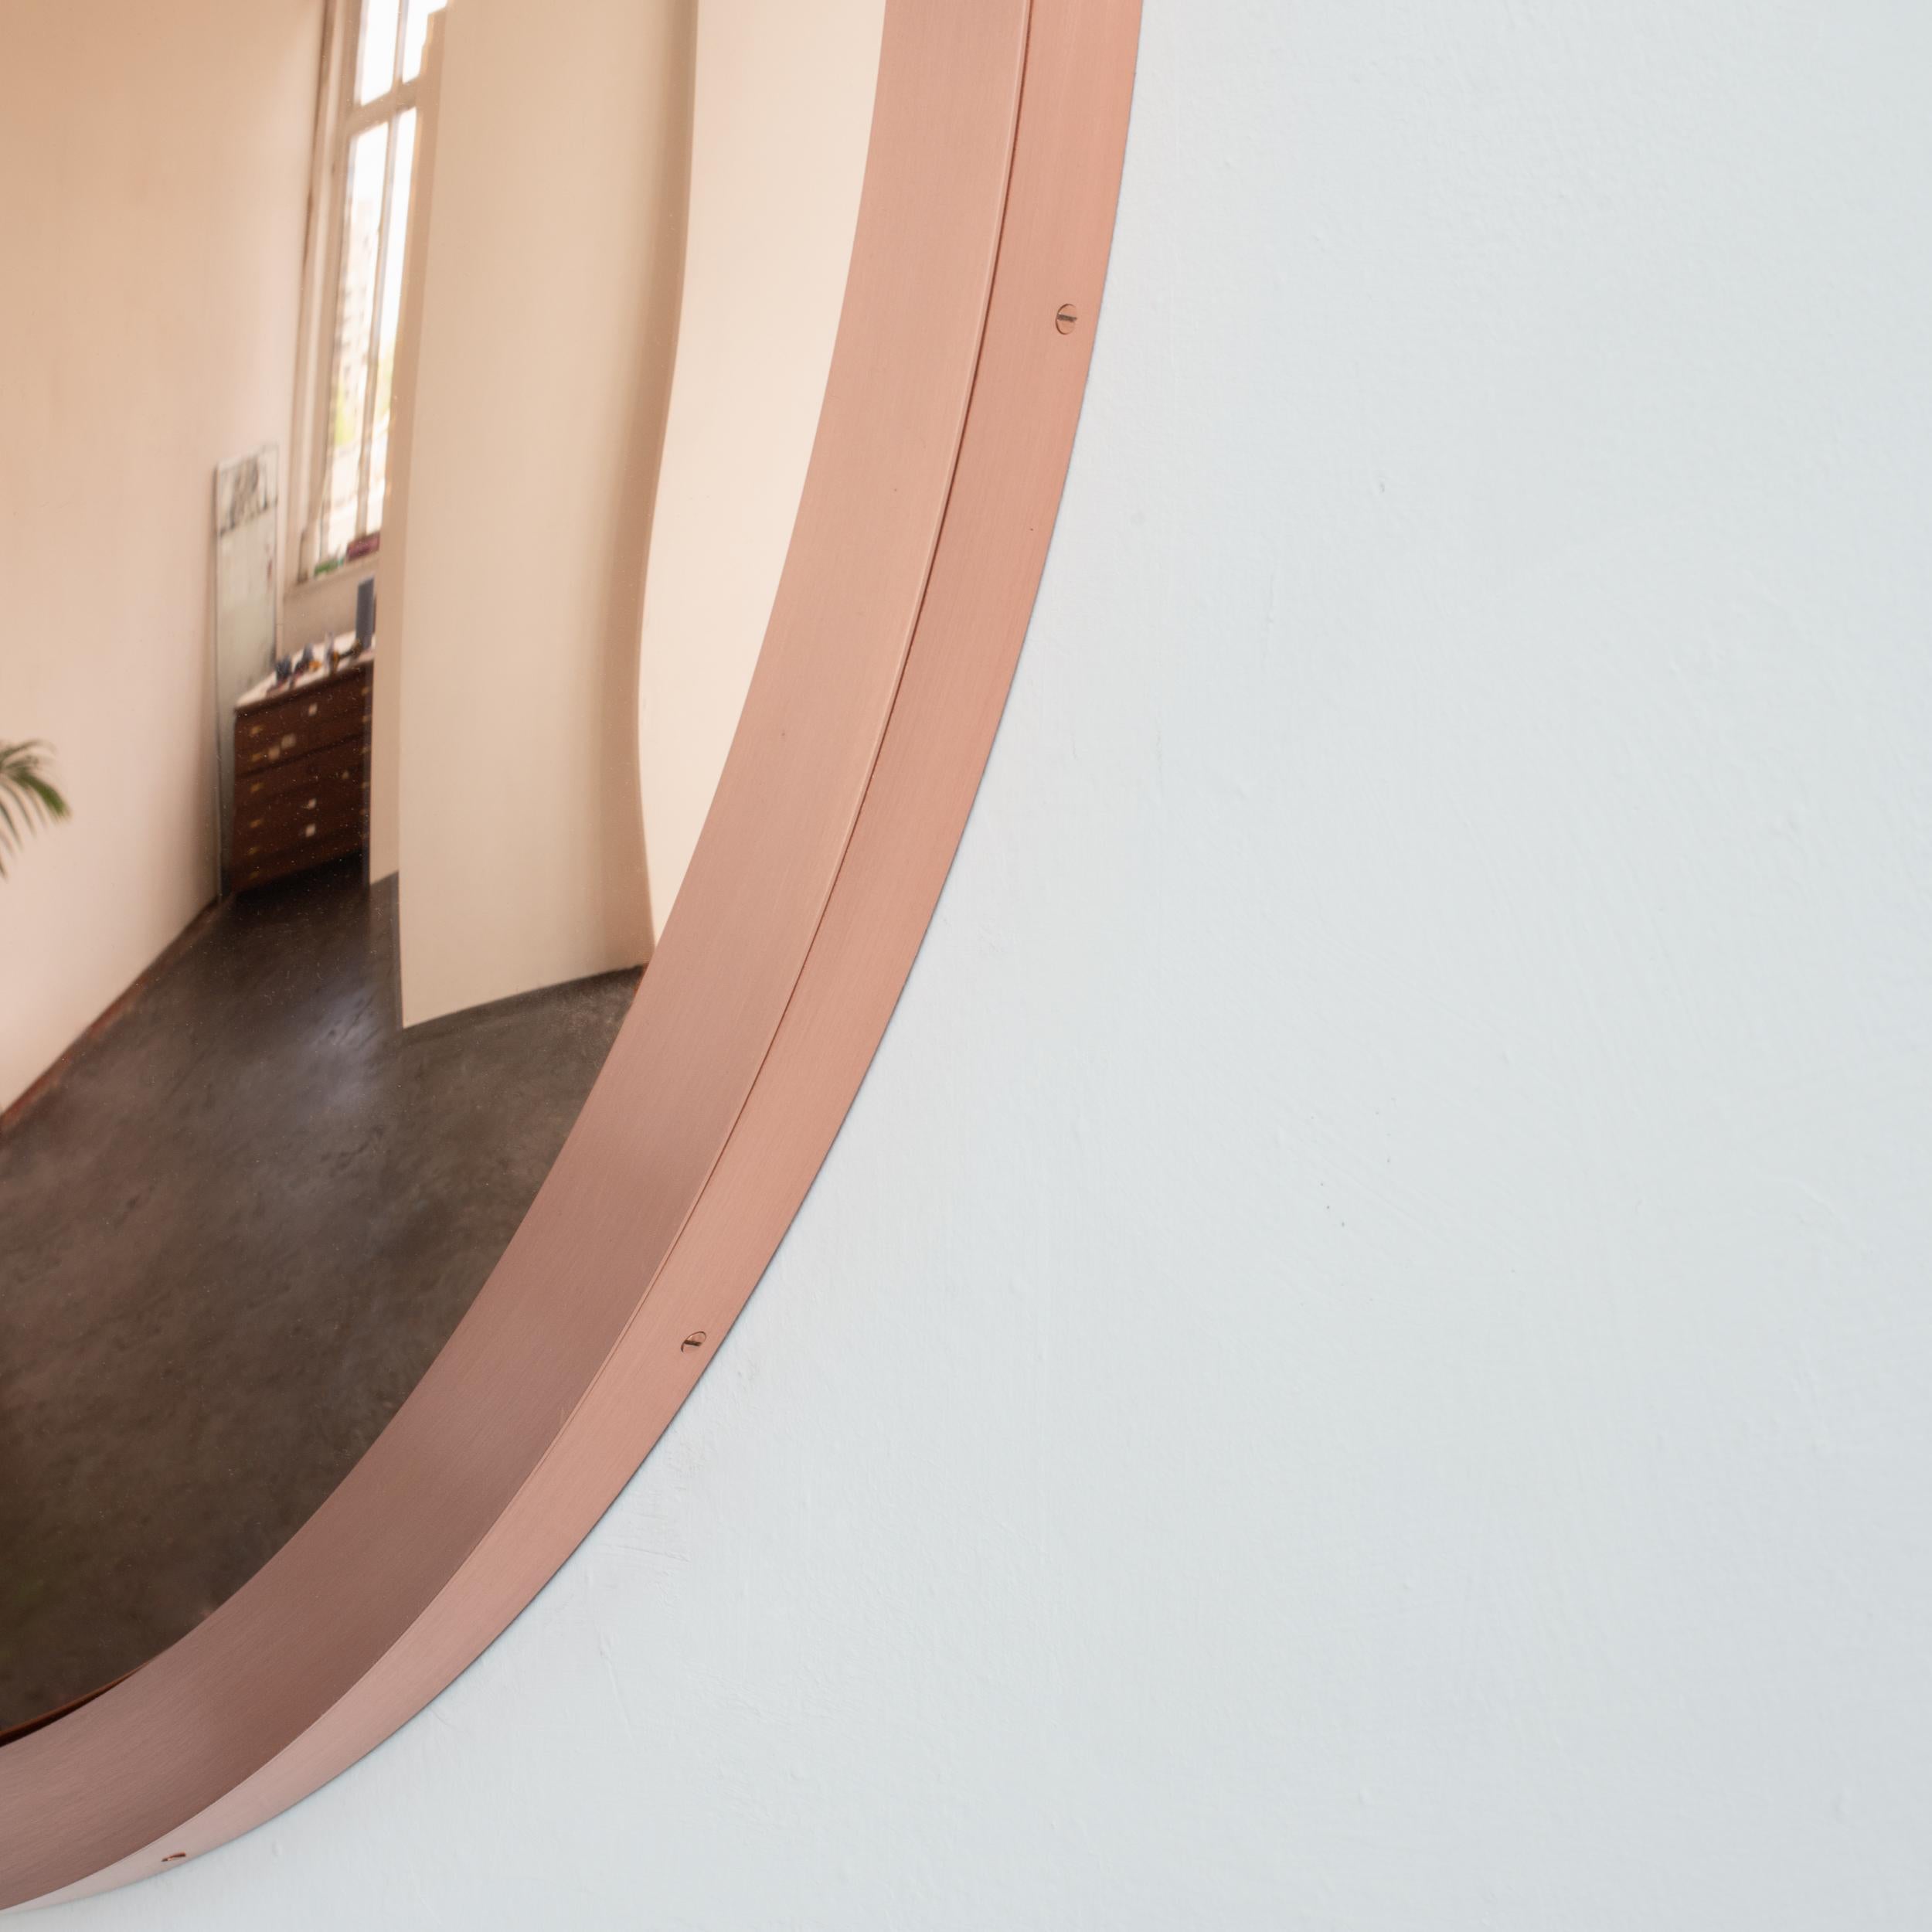 In Stock Orbis Round Rose Gold Tinted Deco Convex Mirror, Copper Frame In New Condition For Sale In London, GB